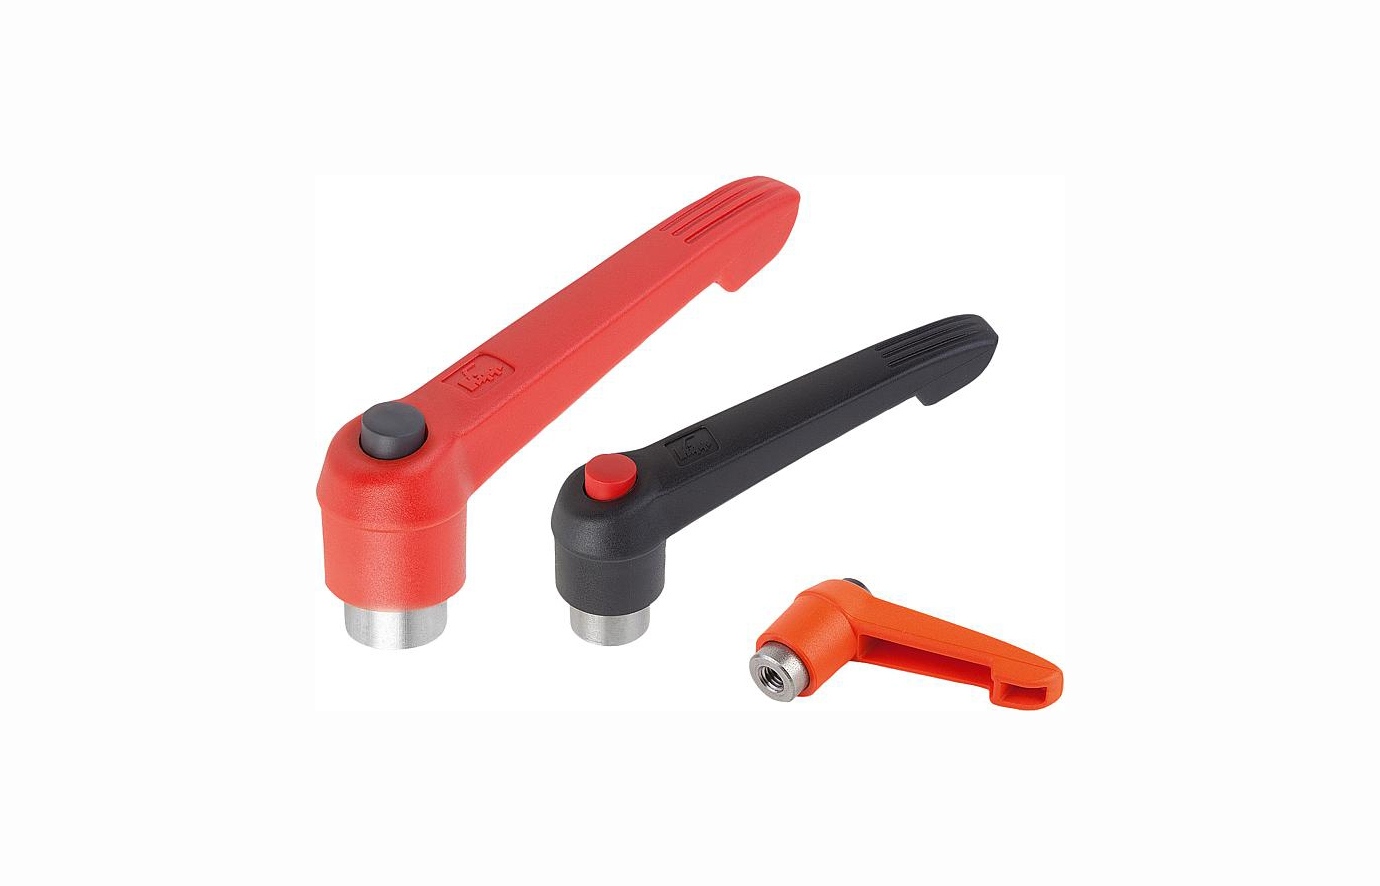 K0270 Clamping levers with push button, internal thread, metal parts stainless steel